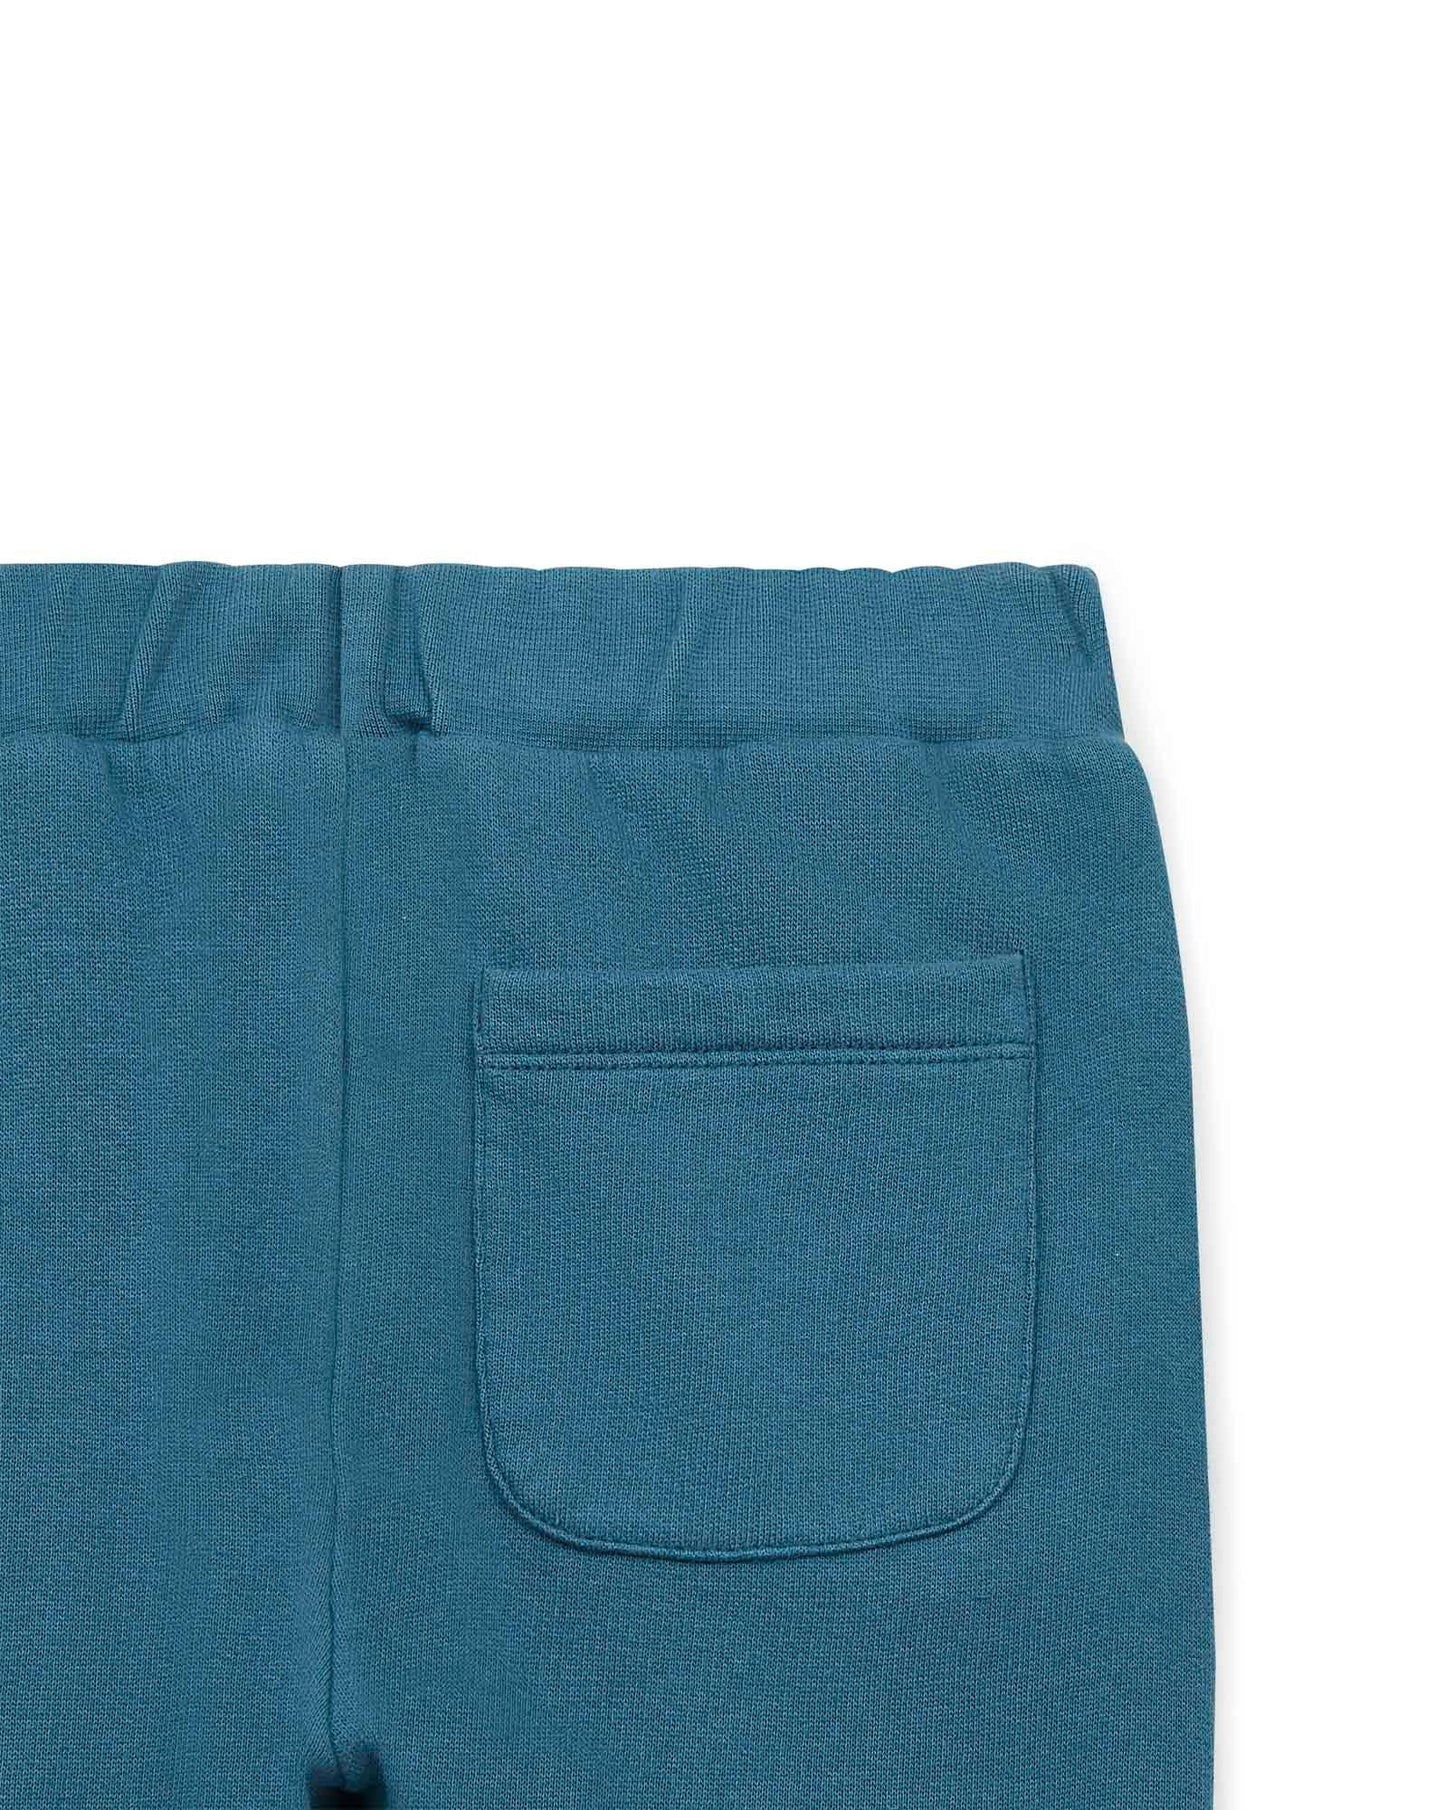 Trousers Jogging Blue in 100% cotton